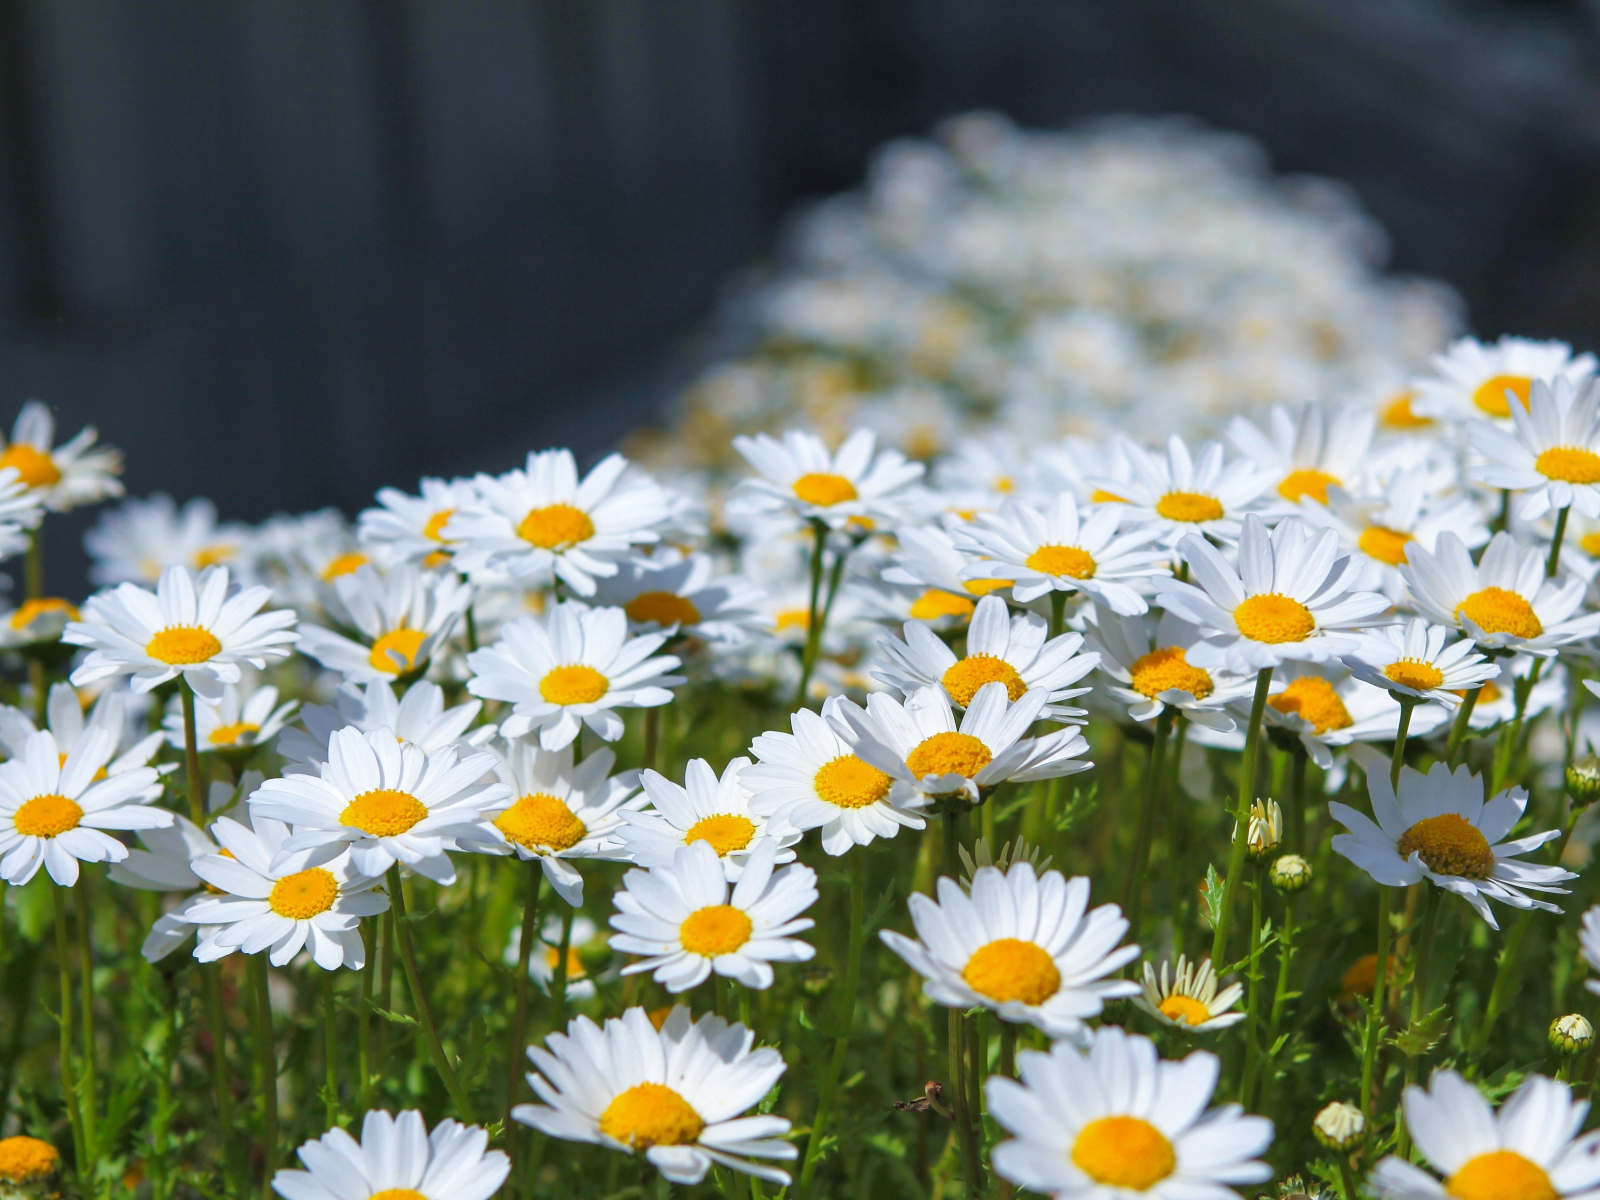 Meadow, spring, flowers, white daisy, 1600x1200 wallpaper